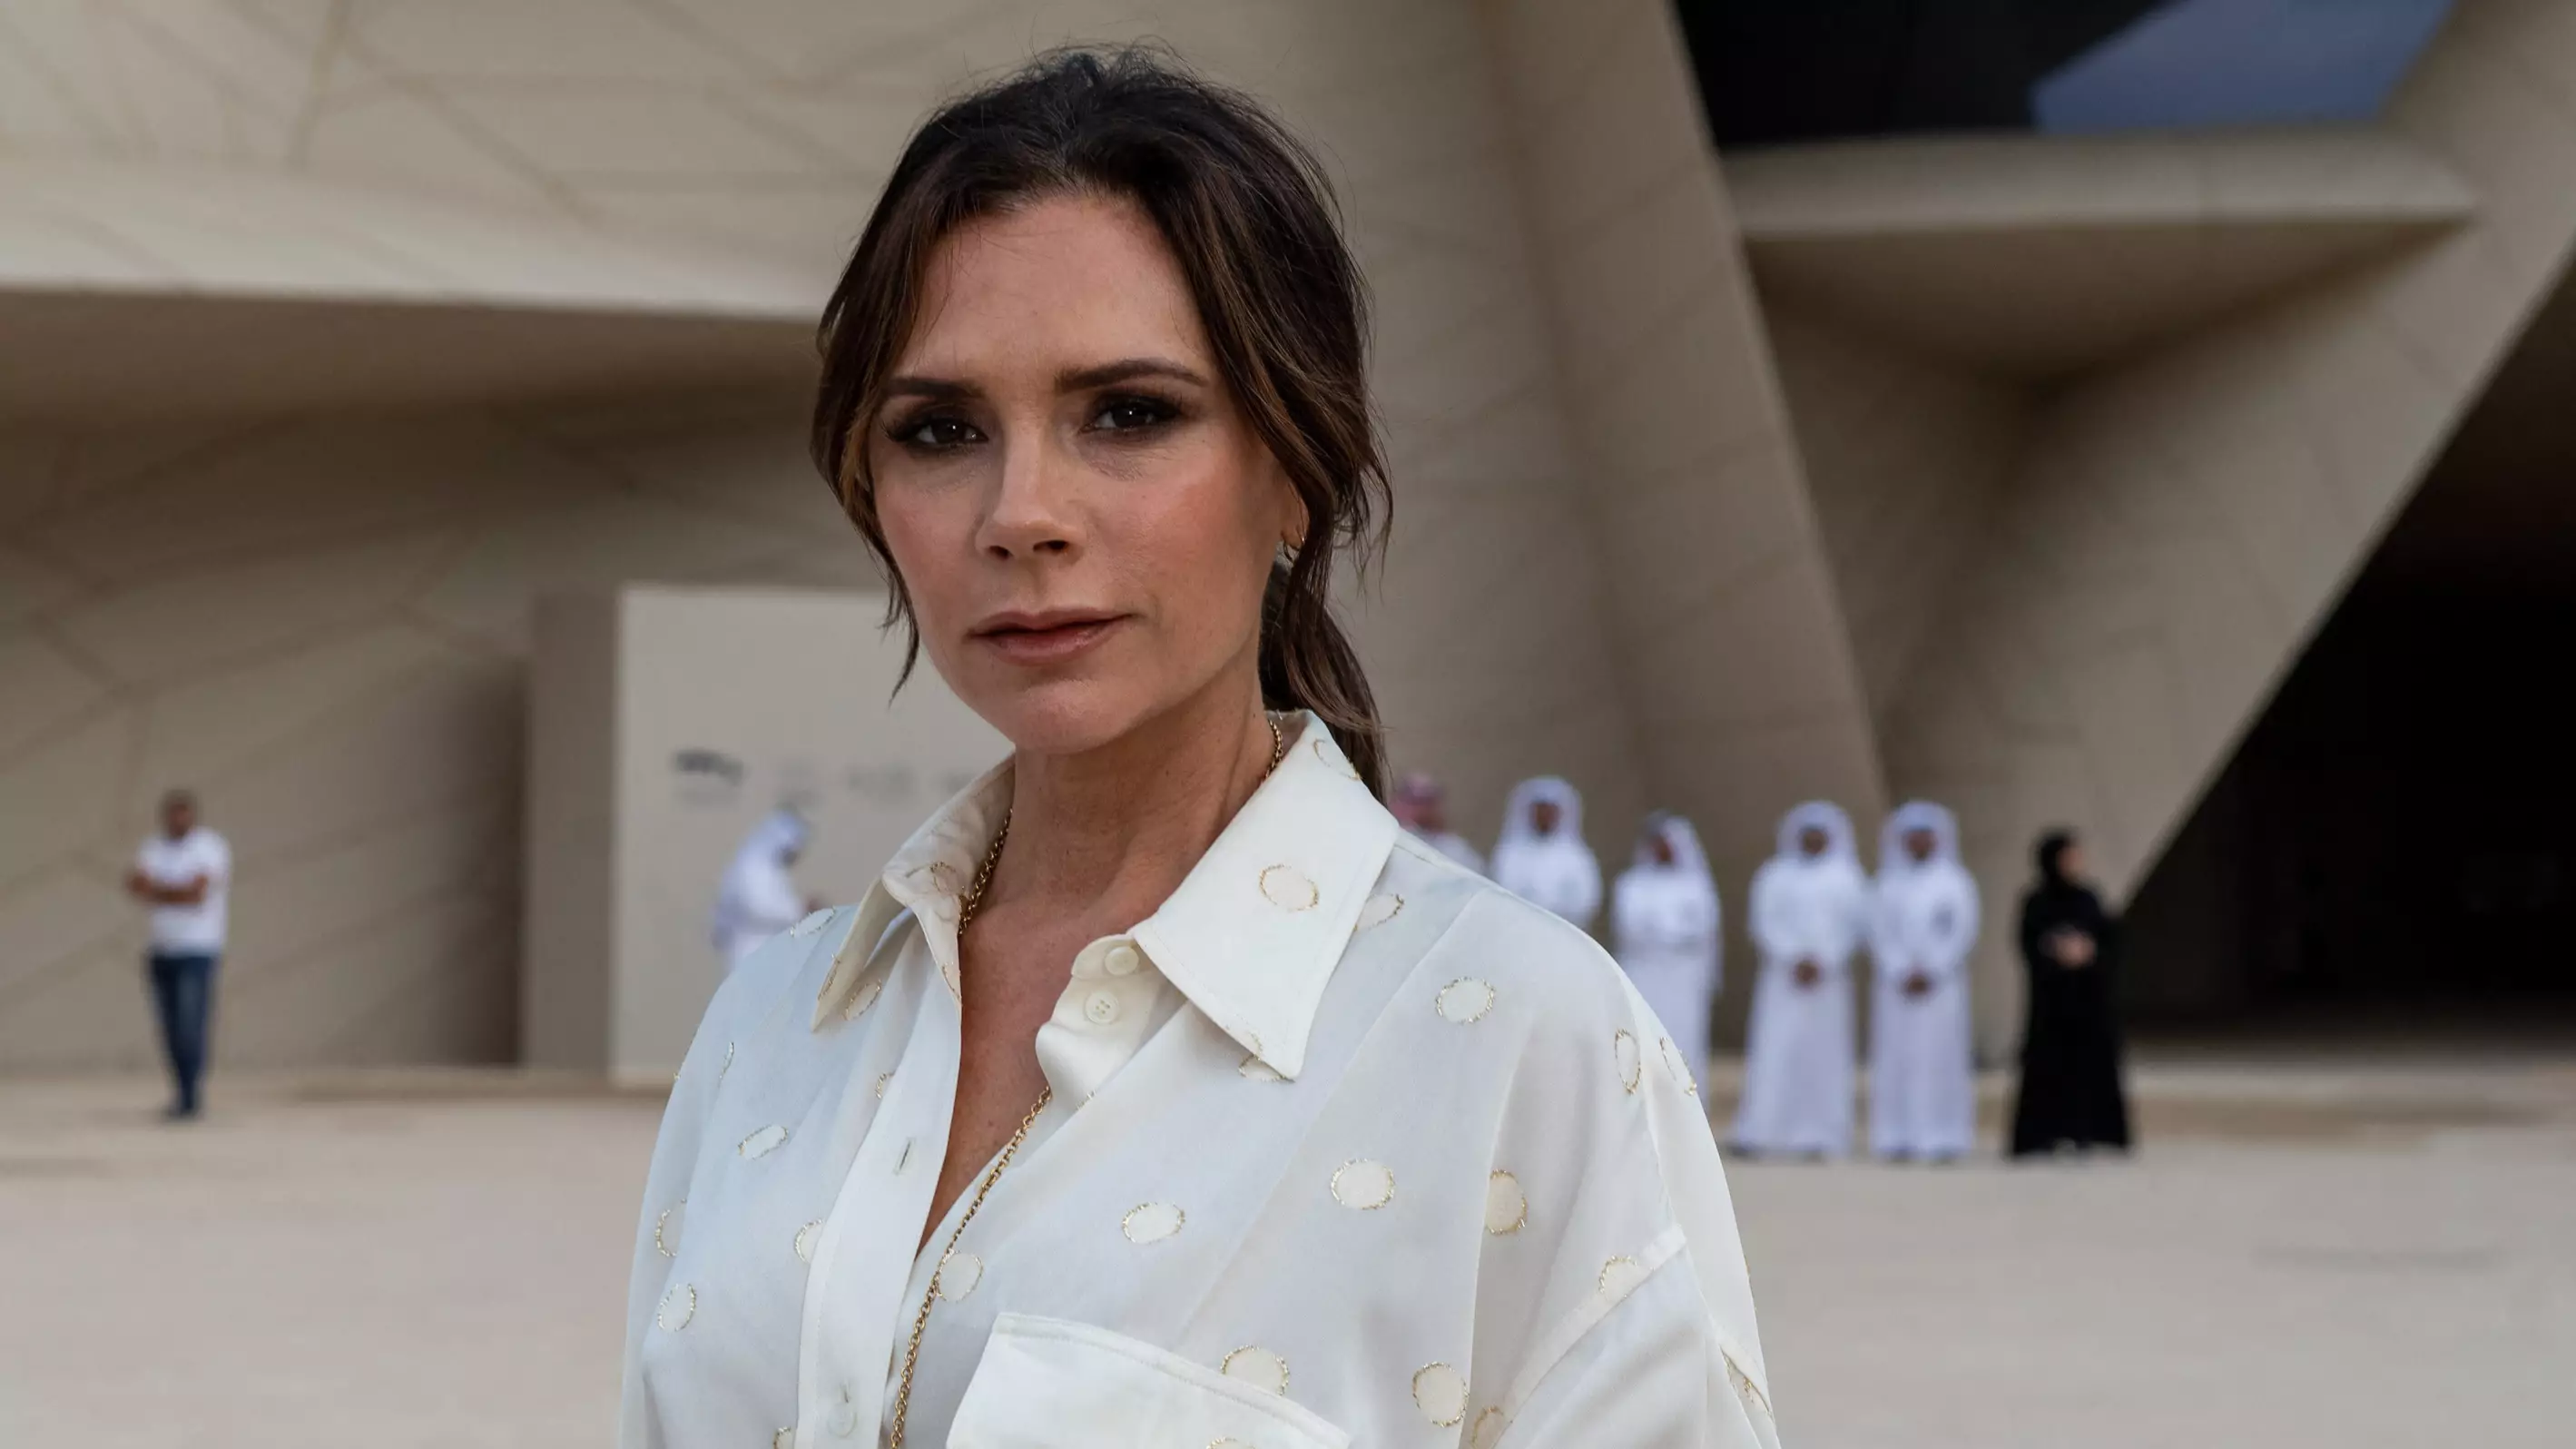 Victoria Beckham Tries To Make Weetabix But Messes Up Badly